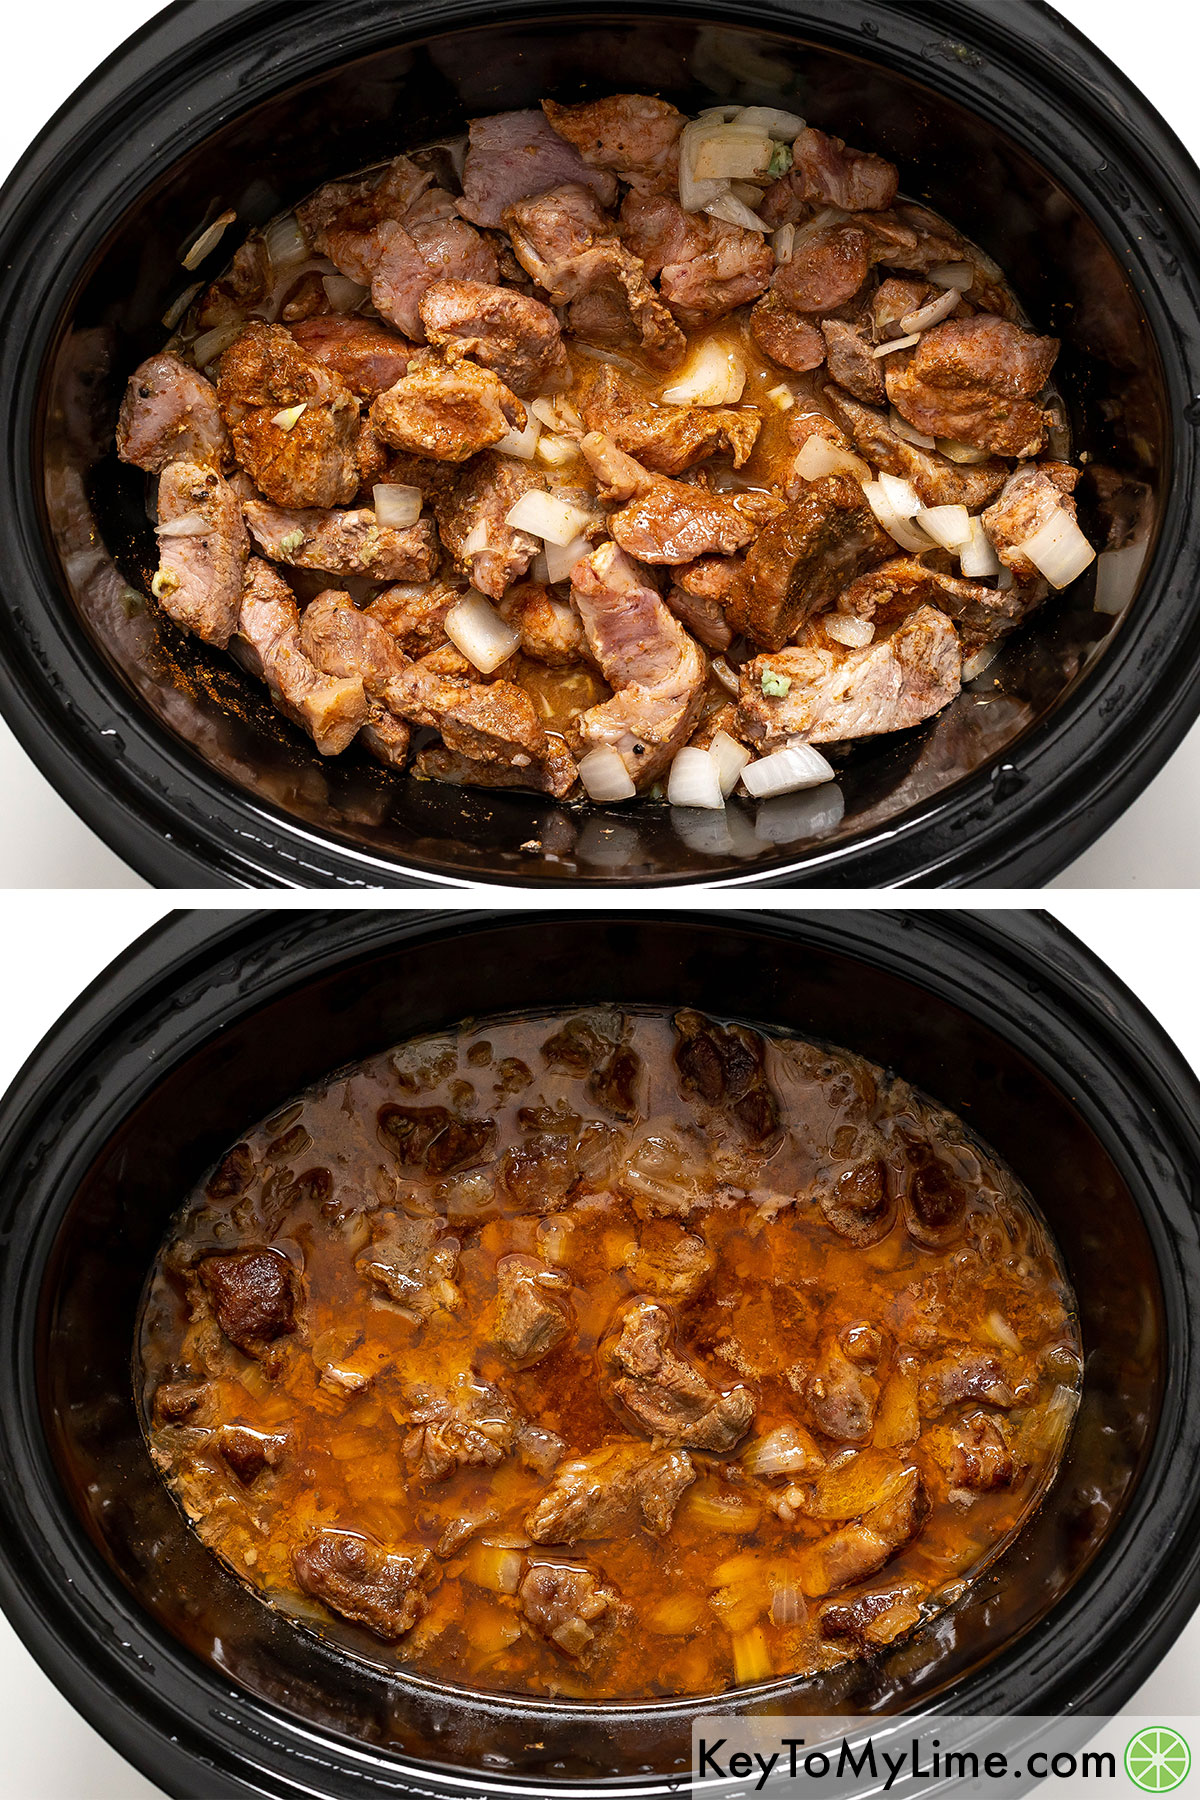 Crockpot carnitas halfway through cooking time, and then after it's fully cooked.